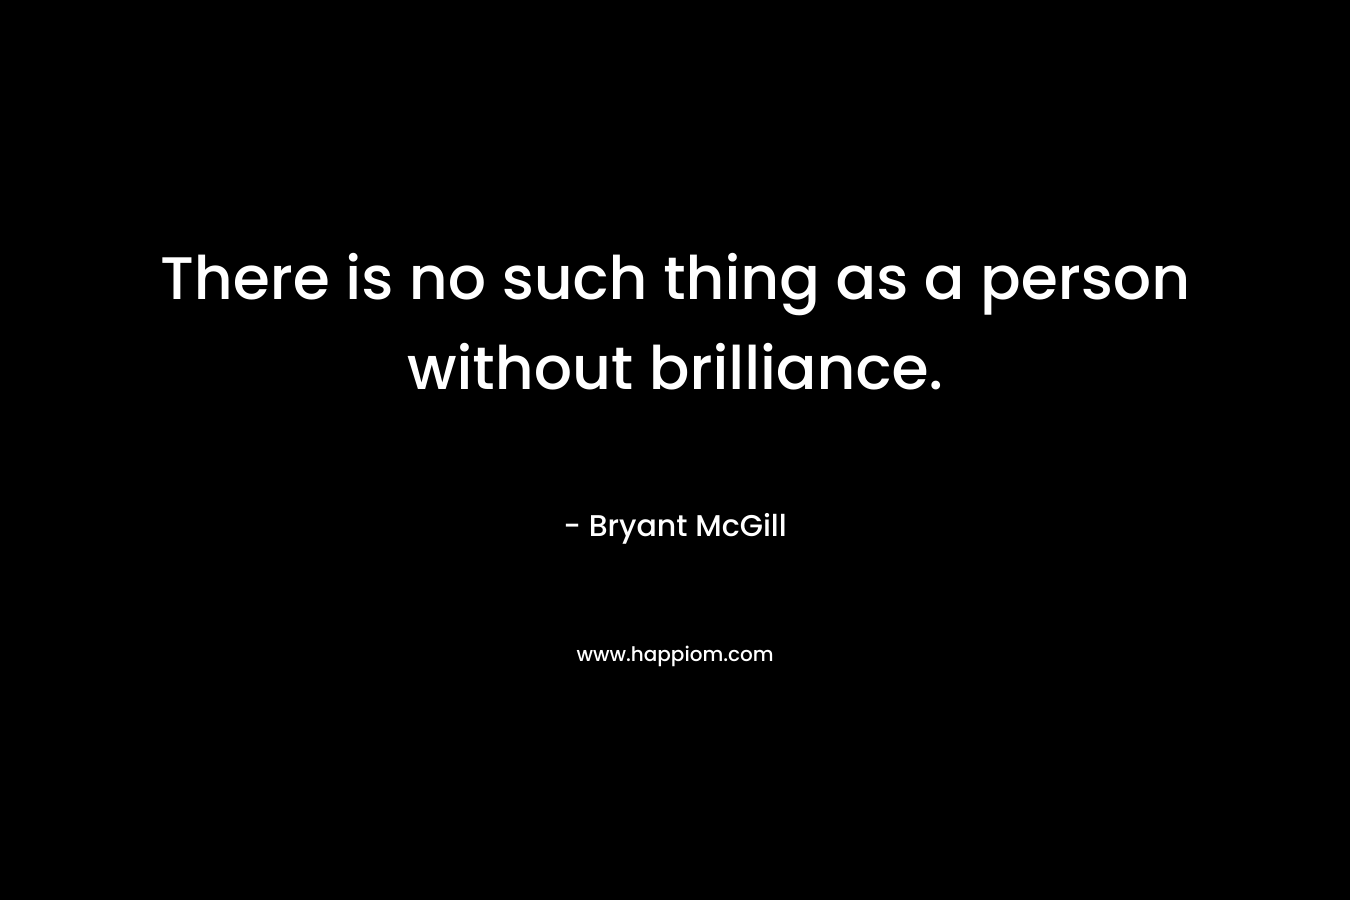 There is no such thing as a person without brilliance.